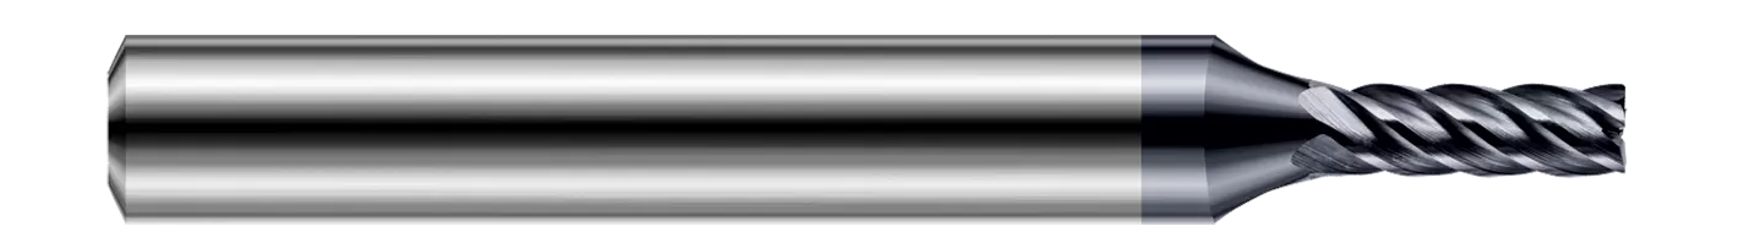 End Mills for Hardened Steels-Corner Radius-For Steels Up to 55 Rc